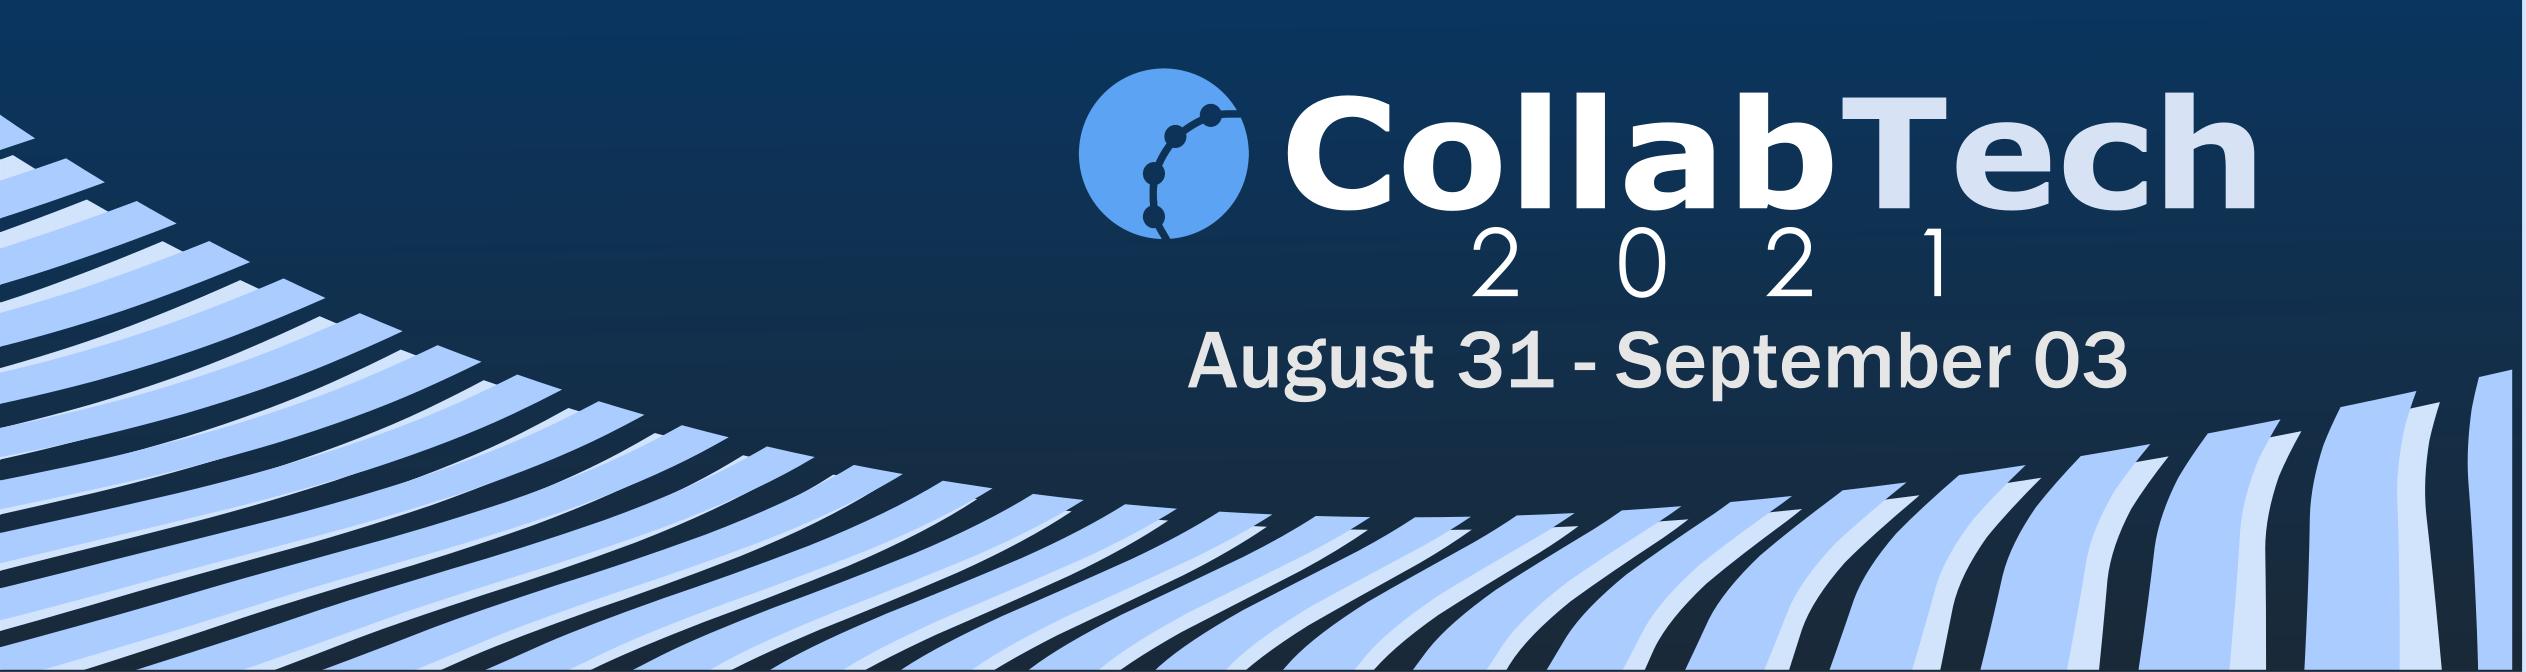 TIDE-UPF will be participating in the 27th International Conference on Collaboration Technologies and Social Computing (CollabTech 2021)